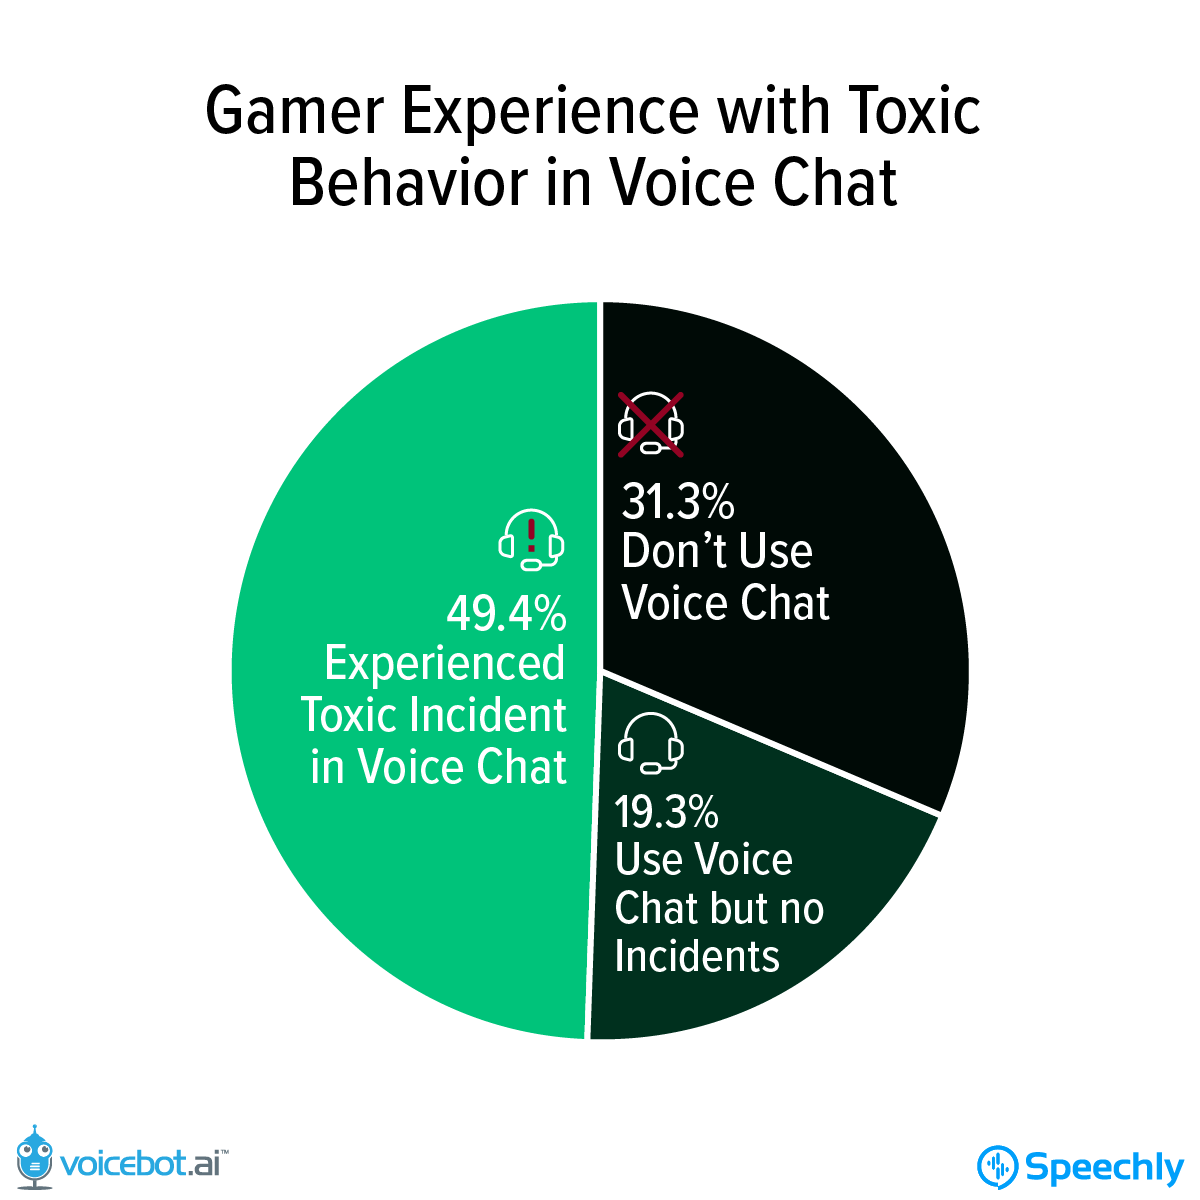 New Unity study shows just how toxic online gaming can be - Protocol